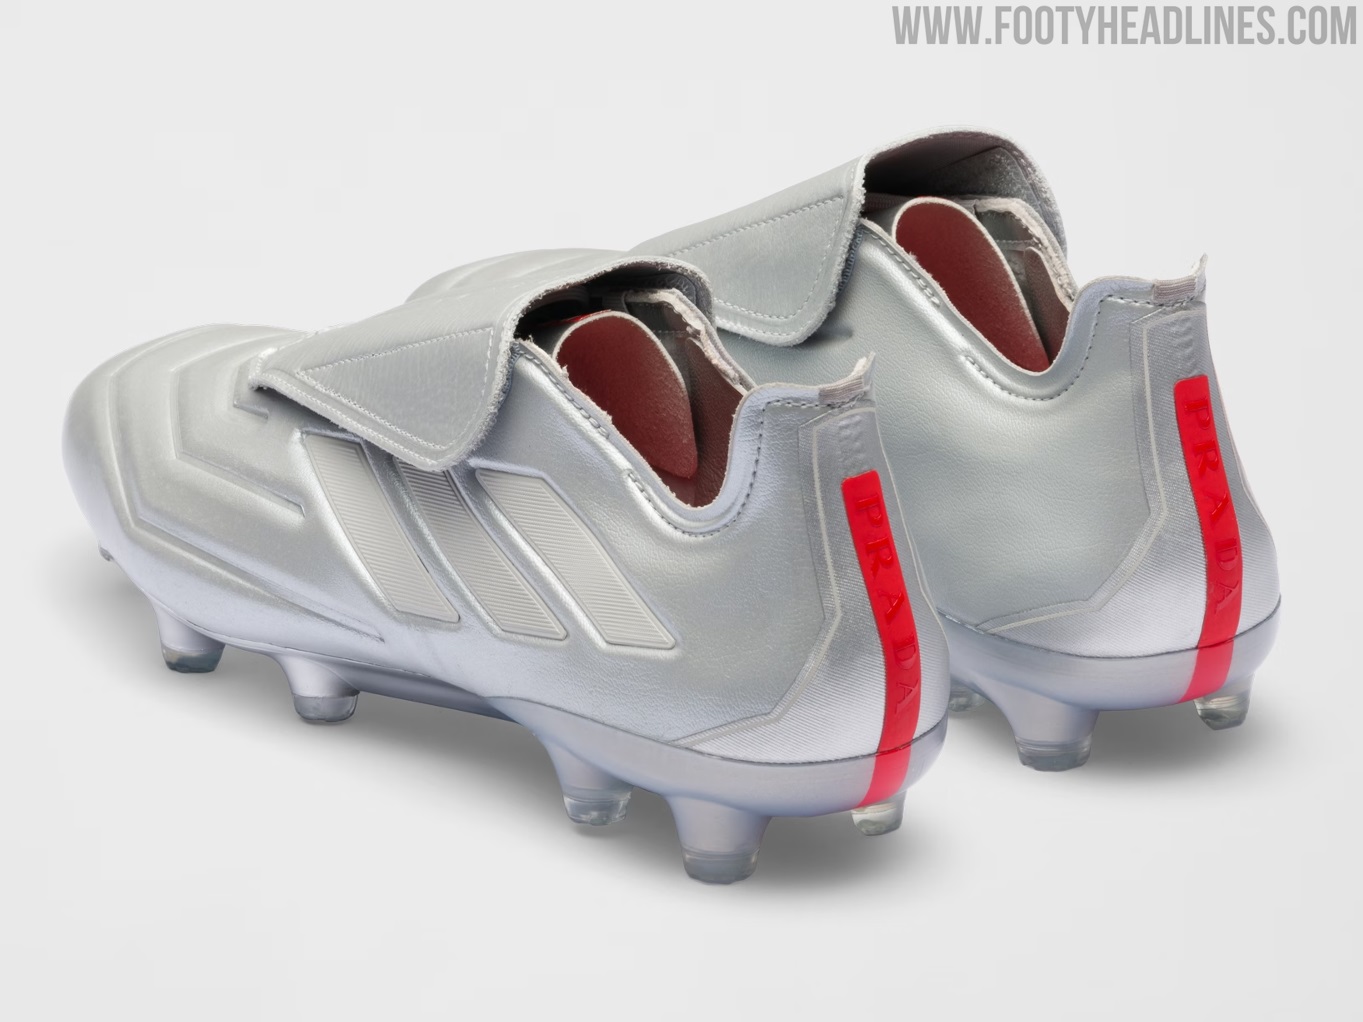 First-Ever Adidas x Prada Football Boots Collection Released - To Be ...